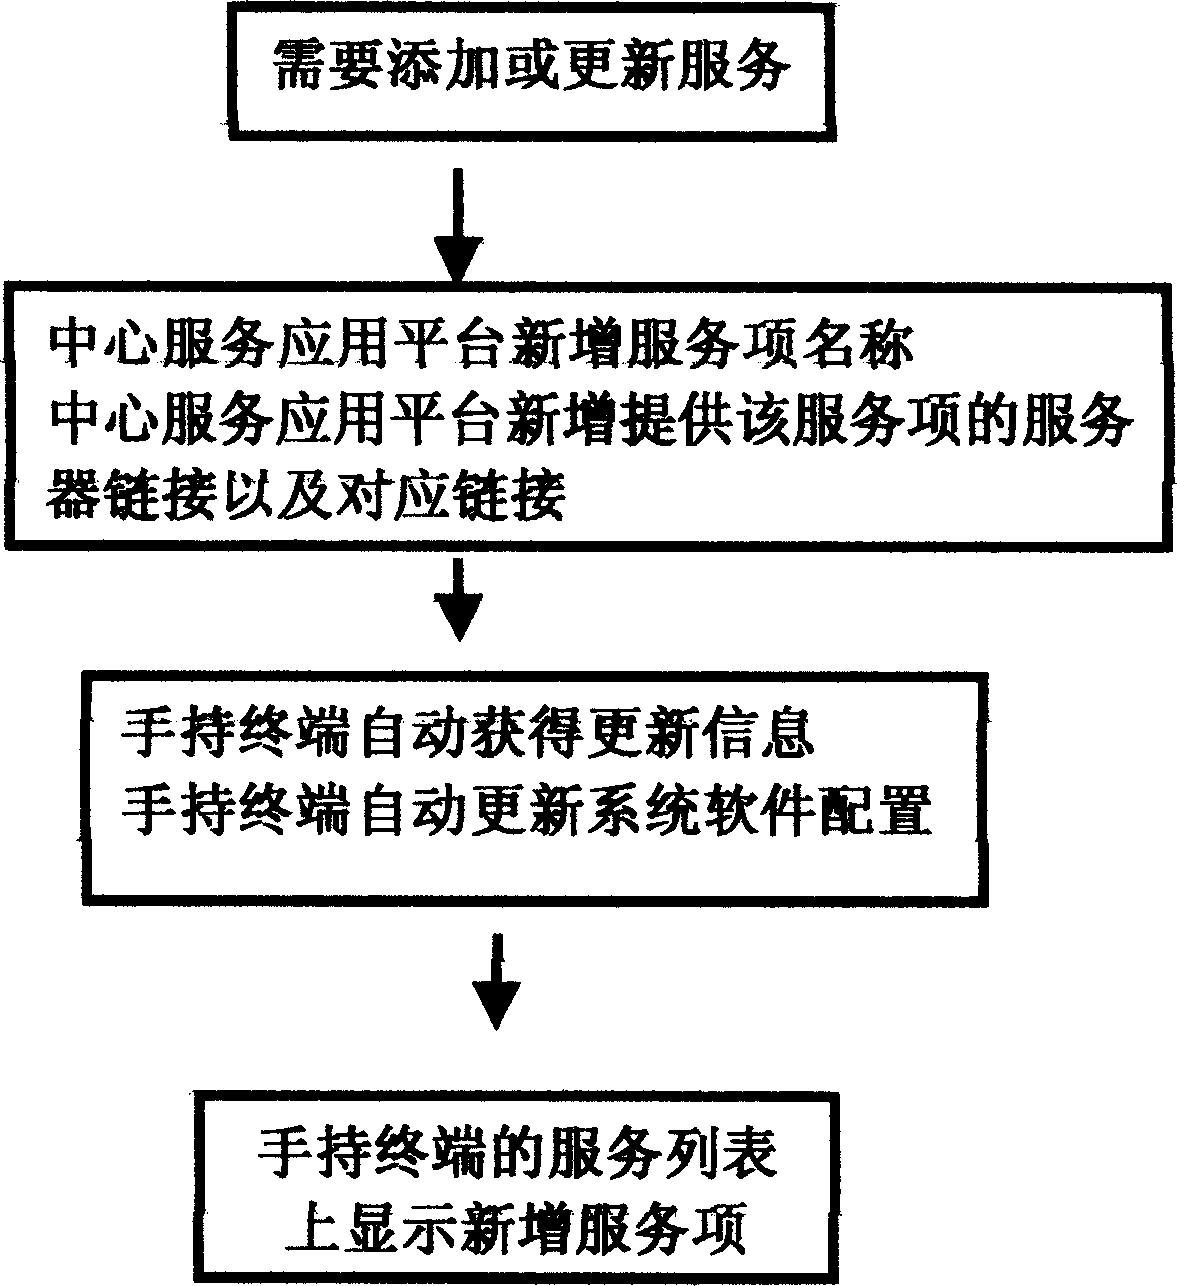 Mobile communication support system for personal hand-held digital assistant device